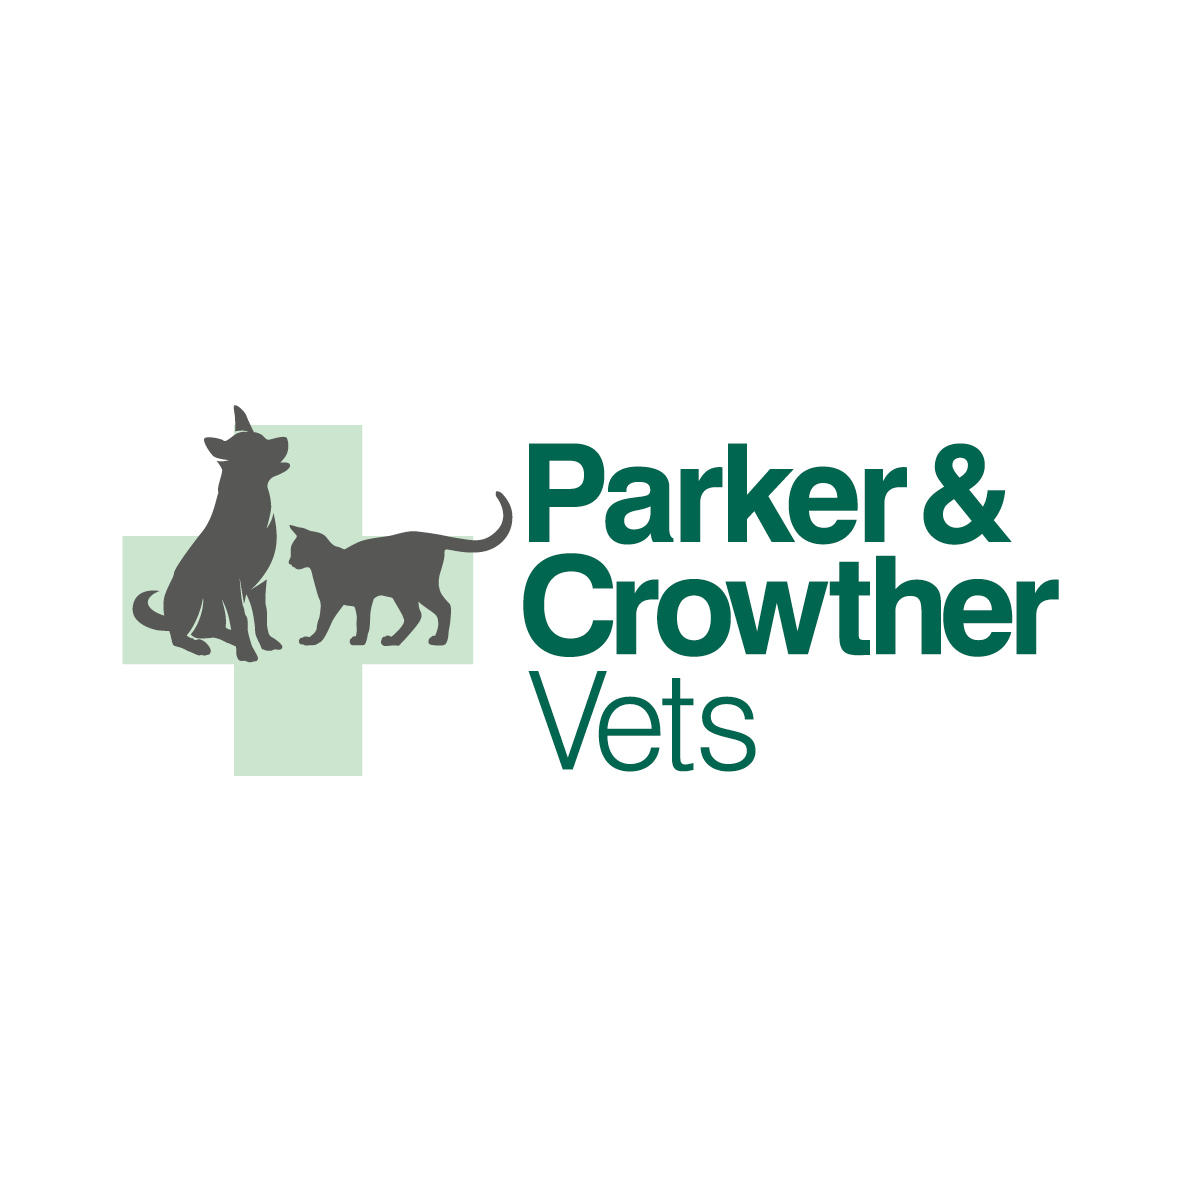 Parker & Crowther Vets, Formby Logo